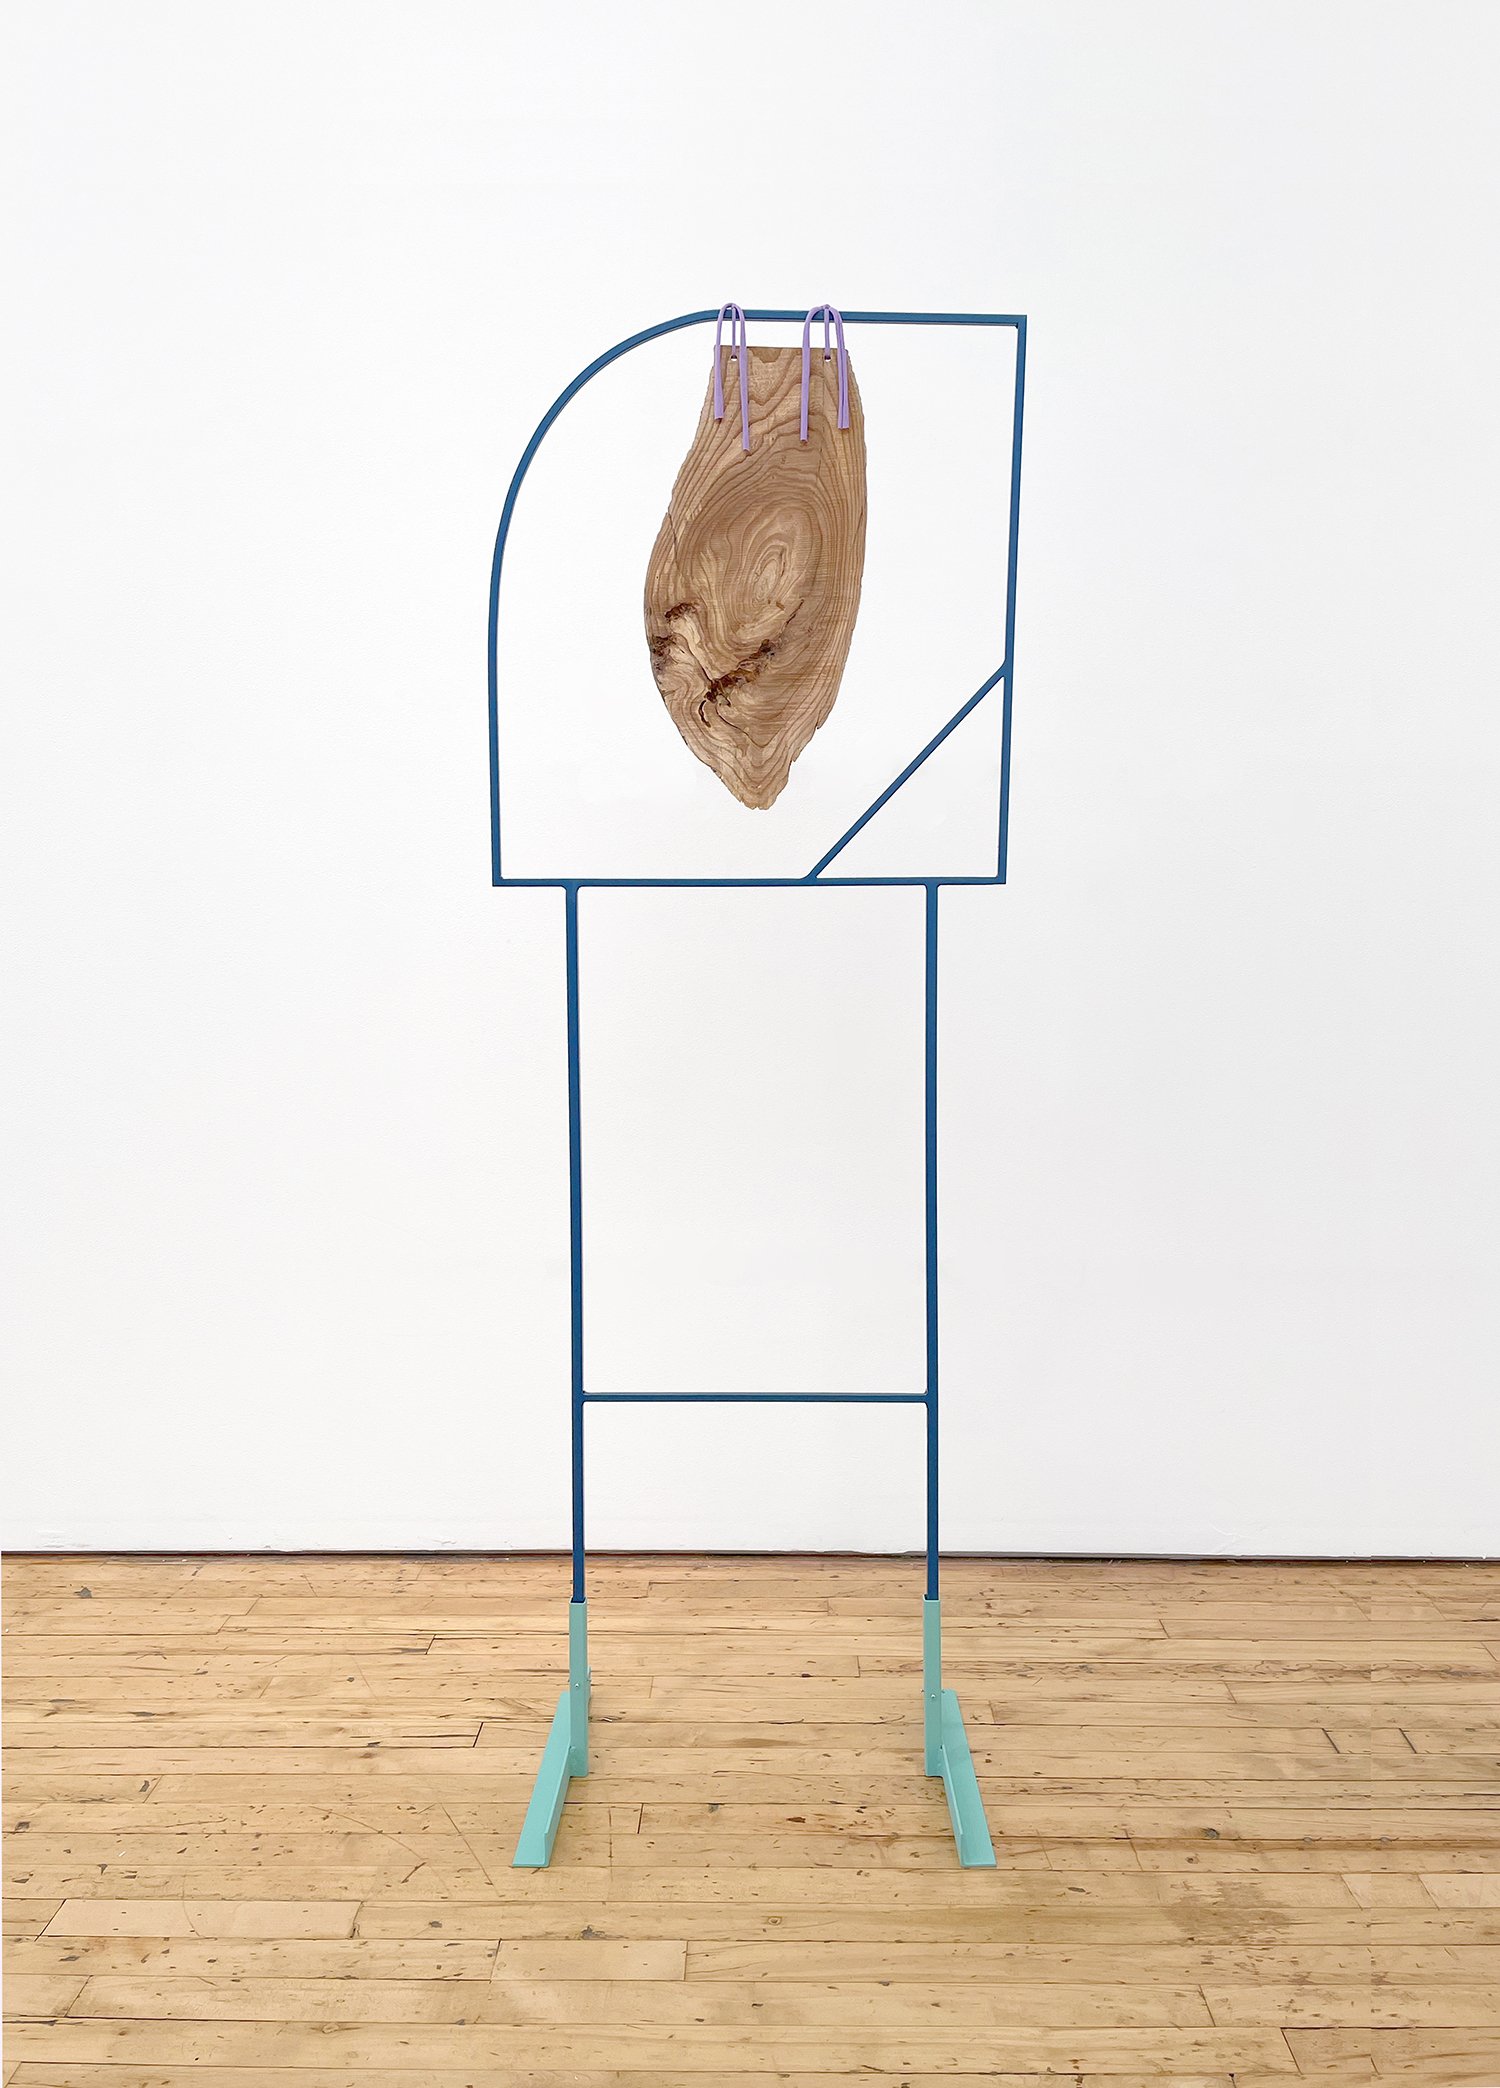  Untitled (Cosmic Fishing #3) Powder coated steel, steel, paint, wood, hand-dyed fabric 67 x 23 x 14 inches 2021  